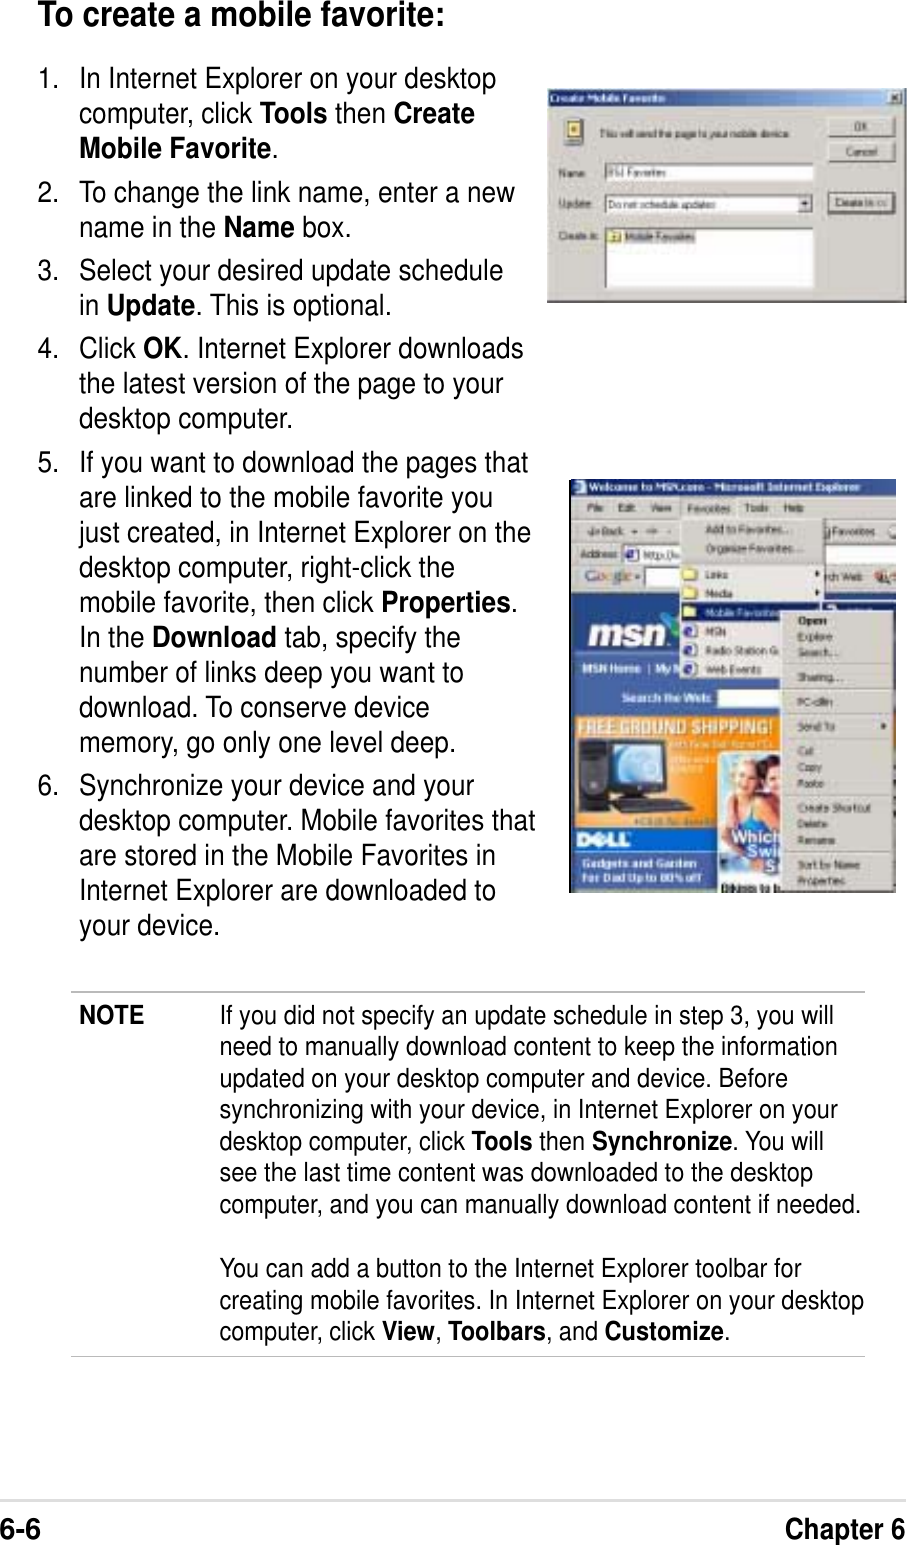 6-6Chapter 6To create a mobile favorite:1. In Internet Explorer on your desktopcomputer, click Tools then CreateMobile Favorite.2. To change the link name, enter a newname in the Name box.3. Select your desired update schedulein Update. This is optional.4. Click OK. Internet Explorer downloadsthe latest version of the page to yourdesktop computer.5. If you want to download the pages thatare linked to the mobile favorite youjust created, in Internet Explorer on thedesktop computer, right-click themobile favorite, then click Properties.In the Download tab, specify thenumber of links deep you want todownload. To conserve devicememory, go only one level deep.6. Synchronize your device and yourdesktop computer. Mobile favorites thatare stored in the Mobile Favorites inInternet Explorer are downloaded toyour device.NOTE If you did not specify an update schedule in step 3, you willneed to manually download content to keep the informationupdated on your desktop computer and device. Beforesynchronizing with your device, in Internet Explorer on yourdesktop computer, click Tools then Synchronize. You willsee the last time content was downloaded to the desktopcomputer, and you can manually download content if needed.You can add a button to the Internet Explorer toolbar forcreating mobile favorites. In Internet Explorer on your desktopcomputer, click View,Toolbars, and Customize.